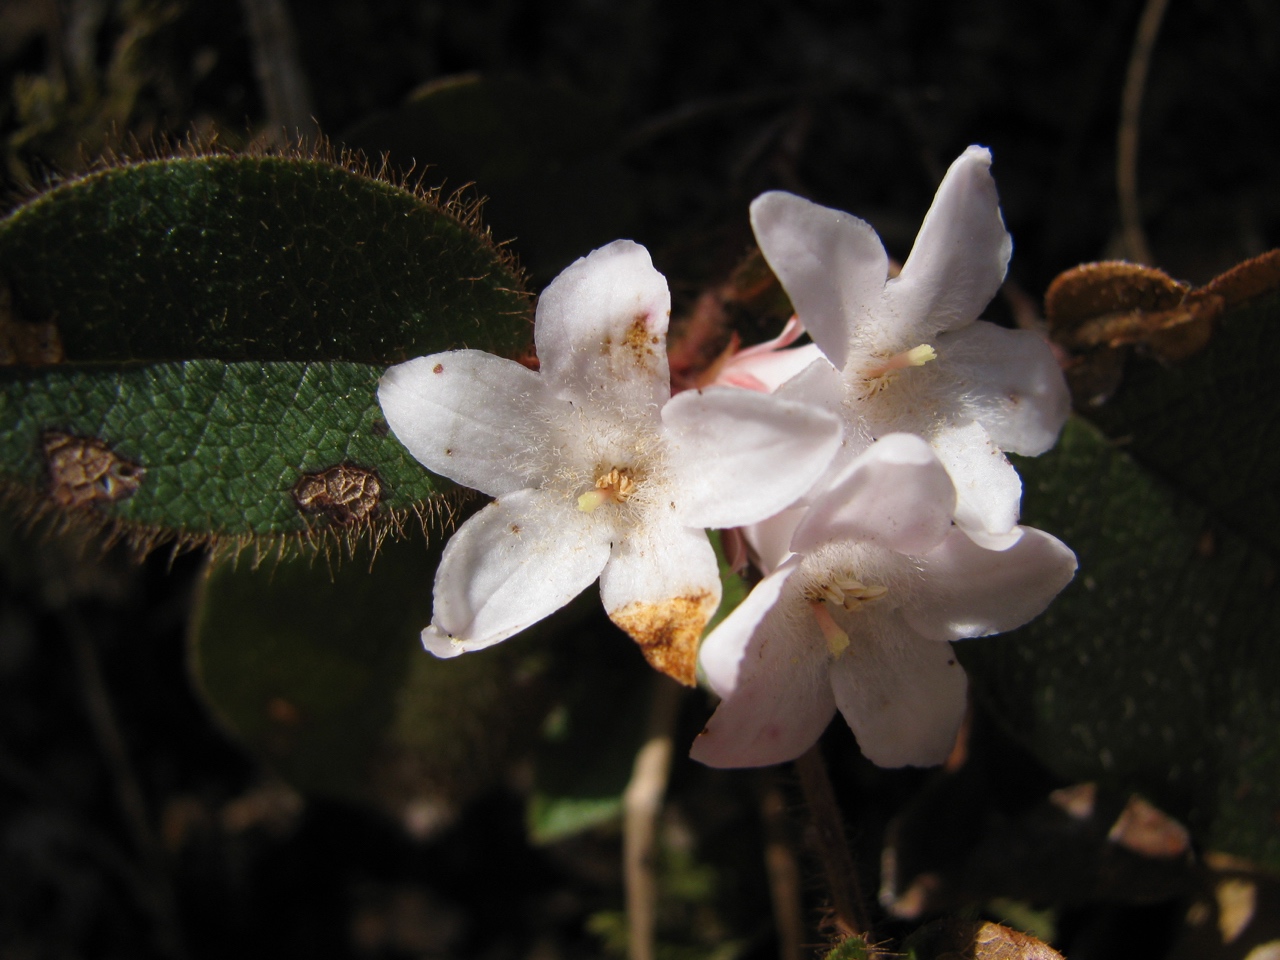 The Scientific Name is Epigaea repens. You will likely hear them called Trailing Arbutus, Mayflower, Ground Laurel. This picture shows the Close-up of flowers in early April showing pubescent leaves and petals of Epigaea repens